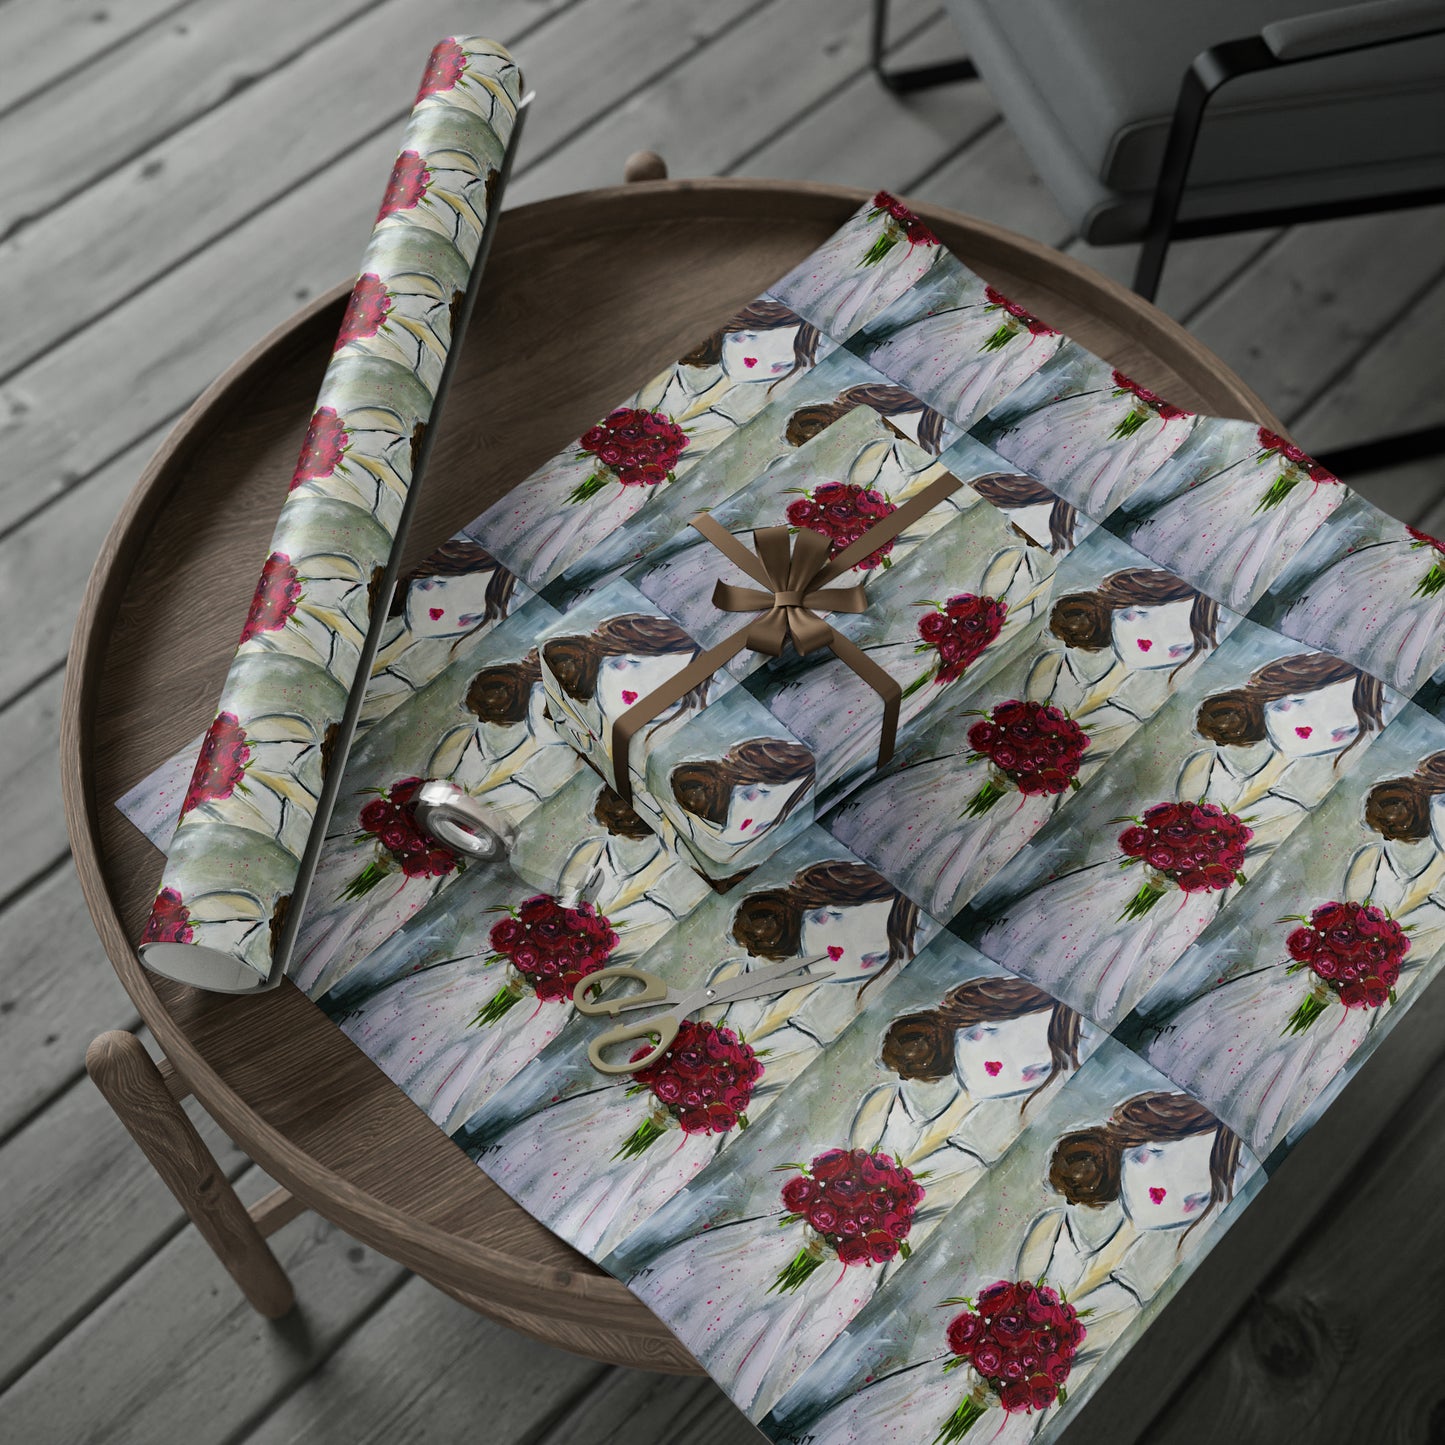 Bushing Bride with Roses bouquet (3 Sizes) Wrapping Papers